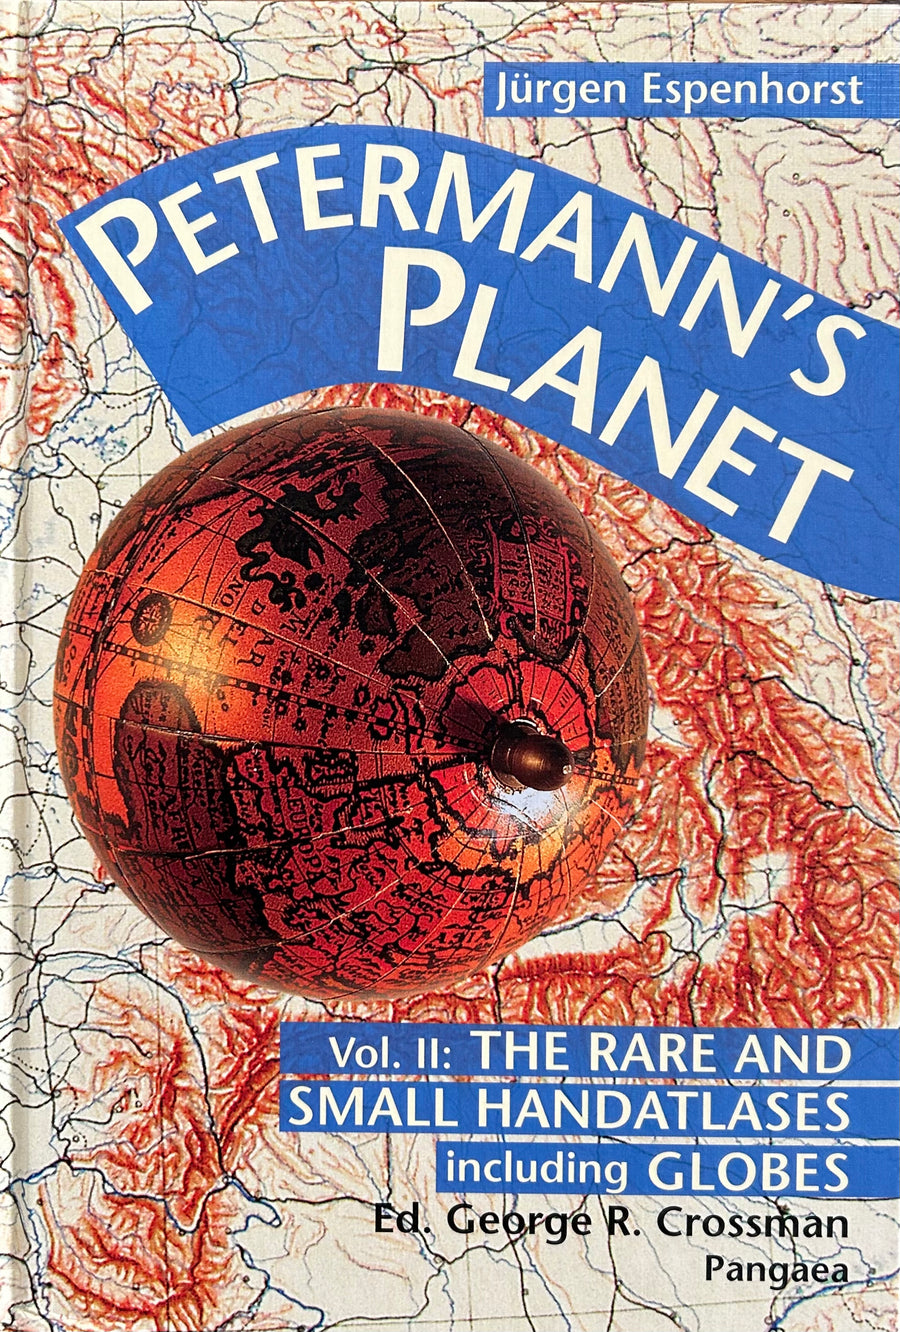 Petermann's Planet - Volume 2: The Rare and Small Handatlases including Globes